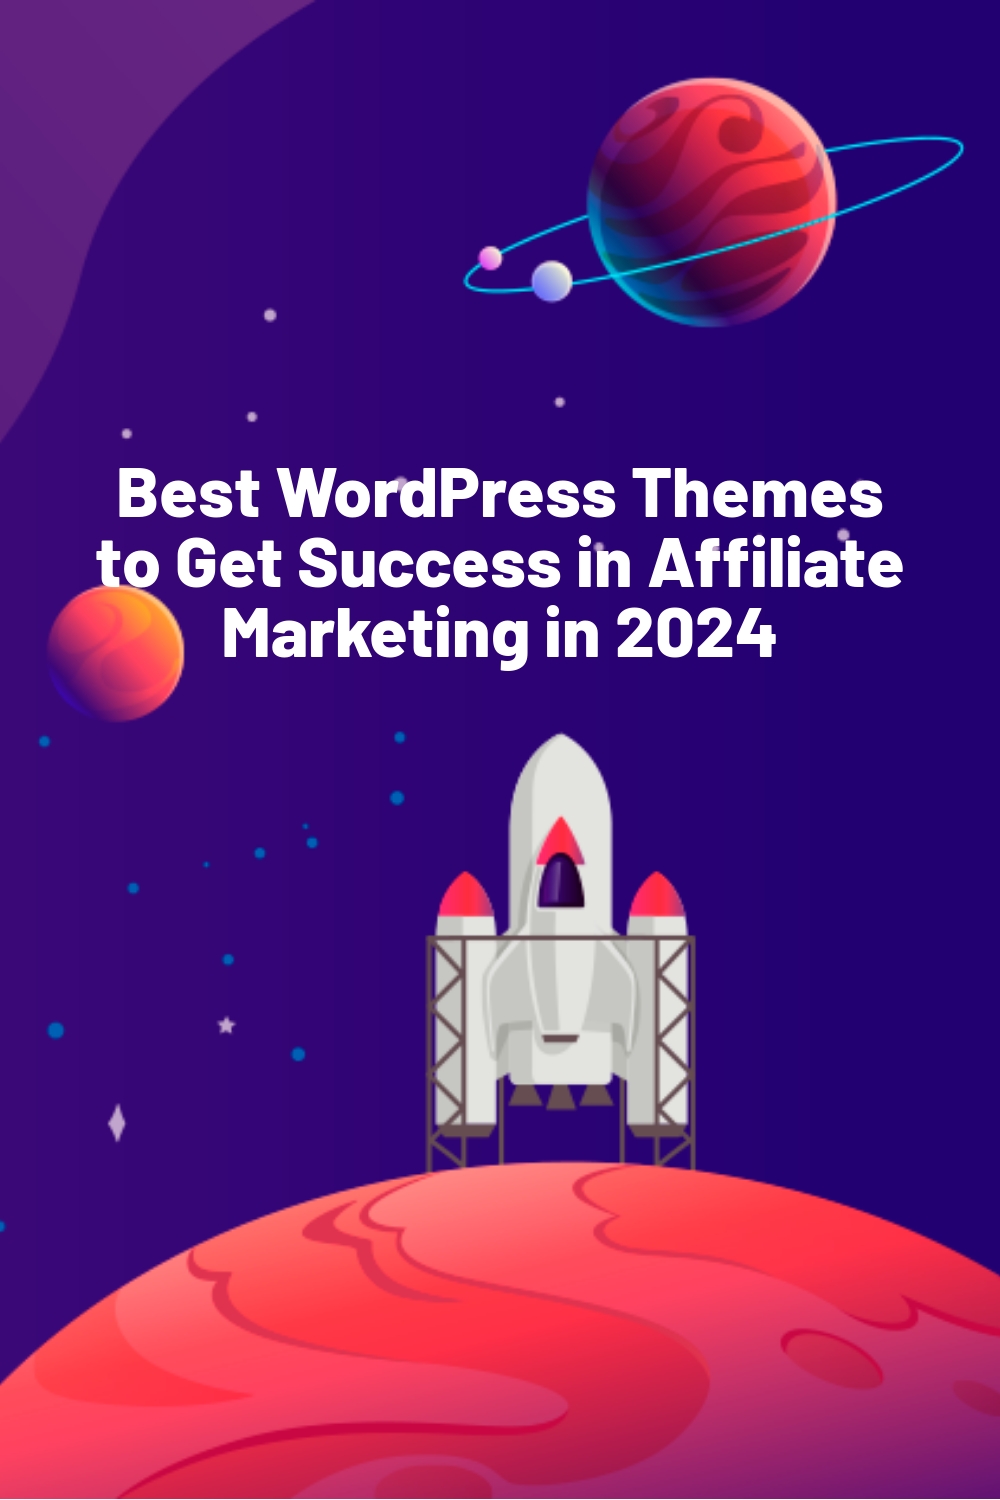 Best WordPress Themes to Get Success in Affiliate Marketing in 2024